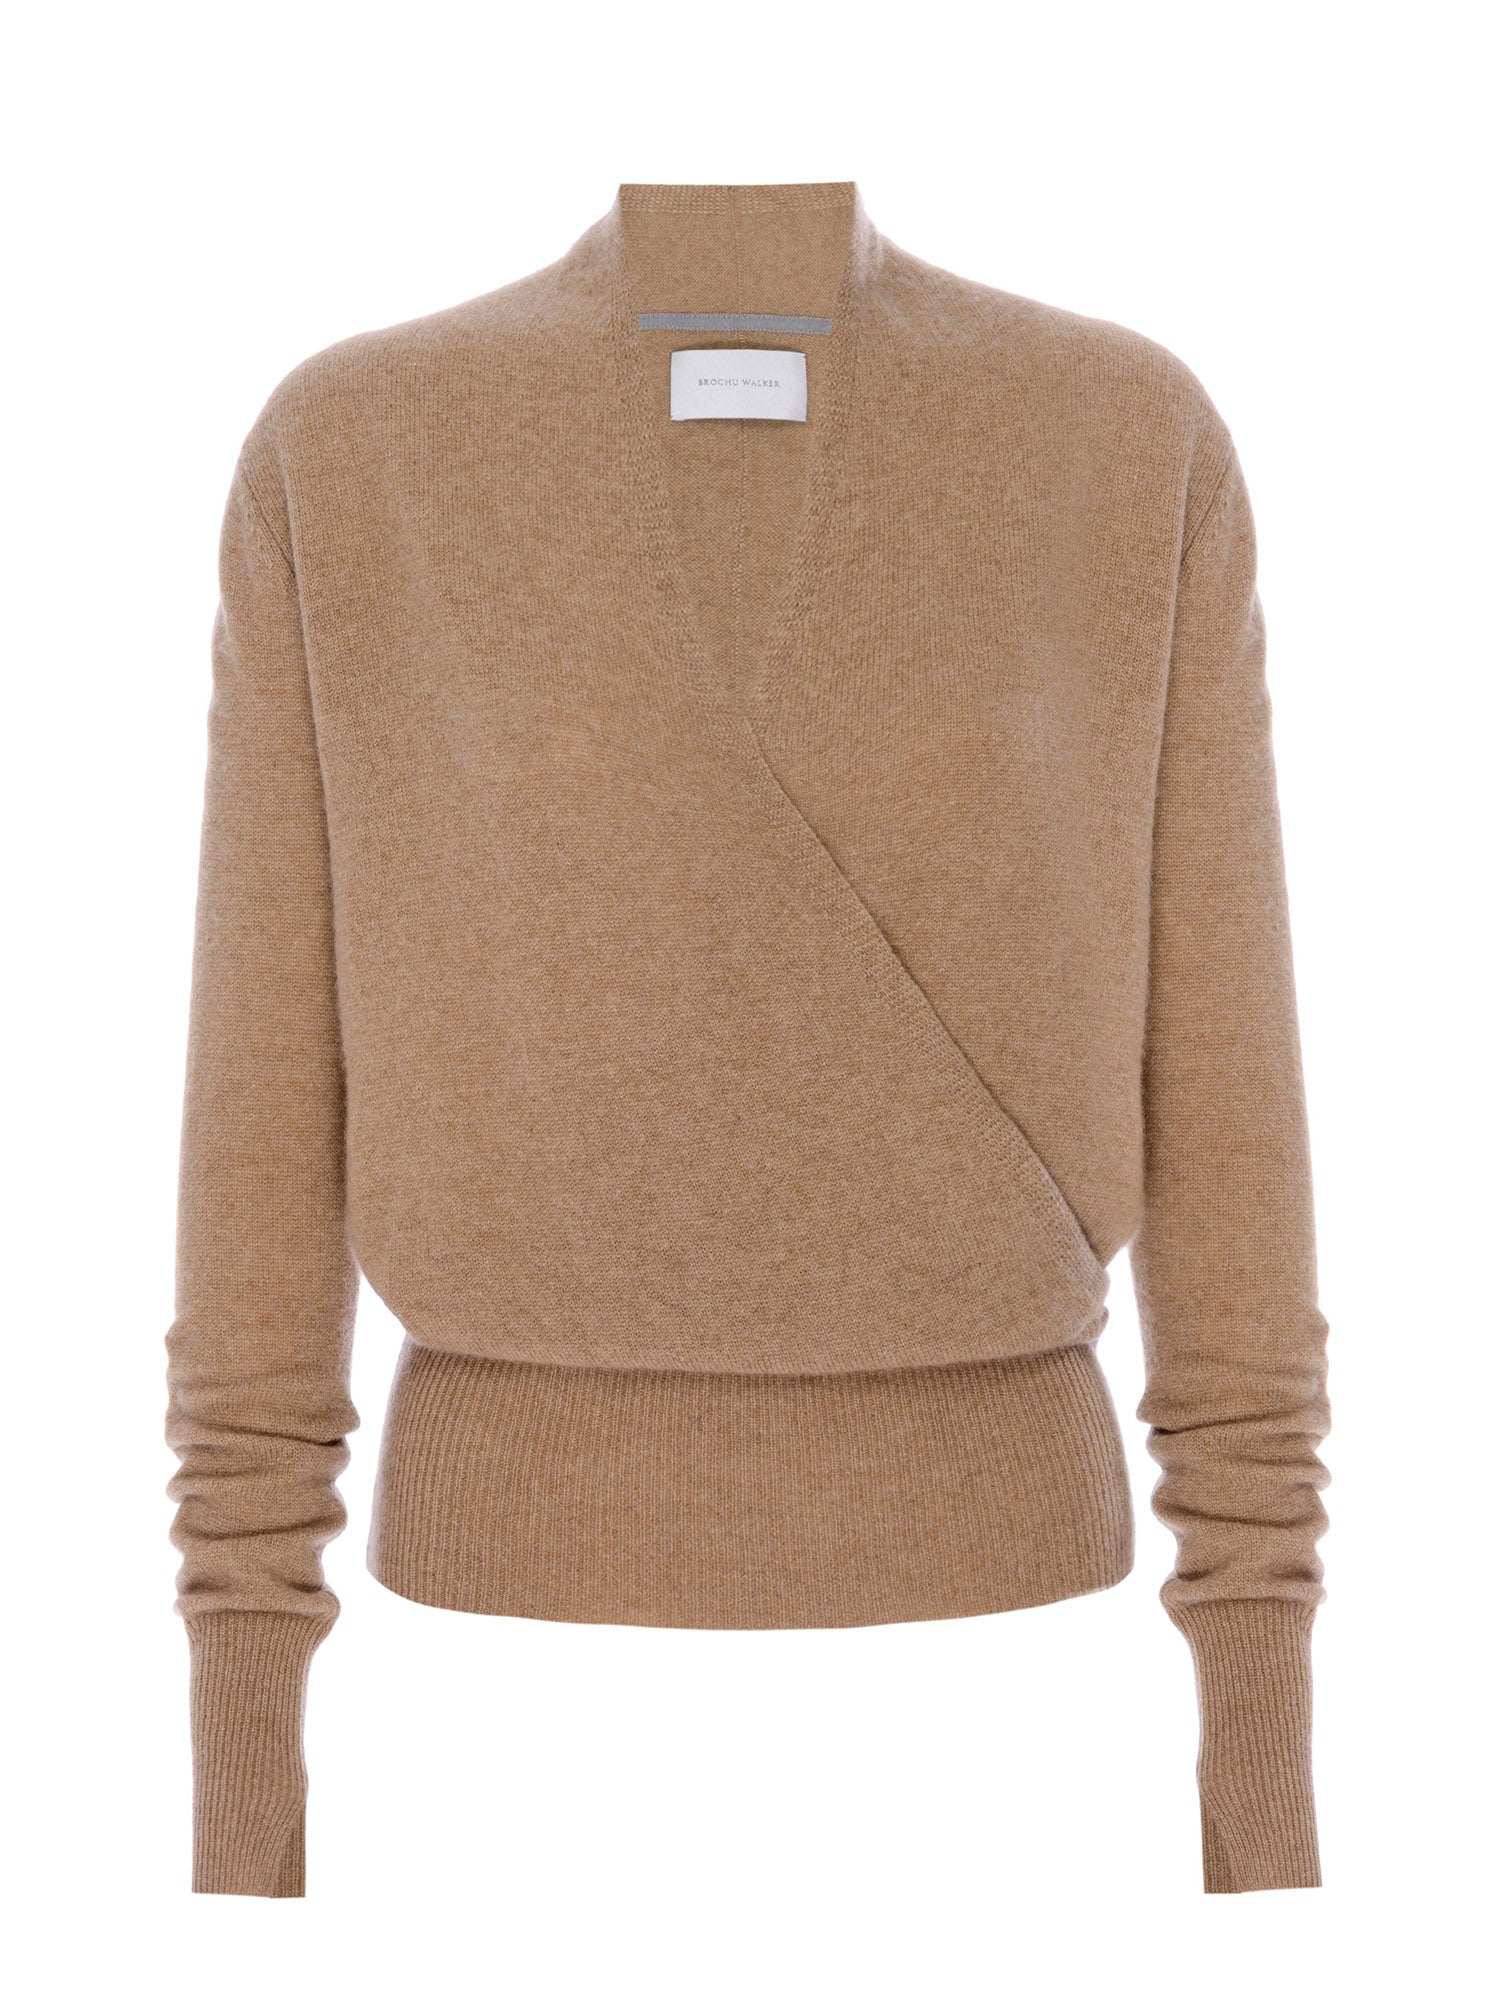 Phinneas cashmere v-neck blue tan sweater flat view